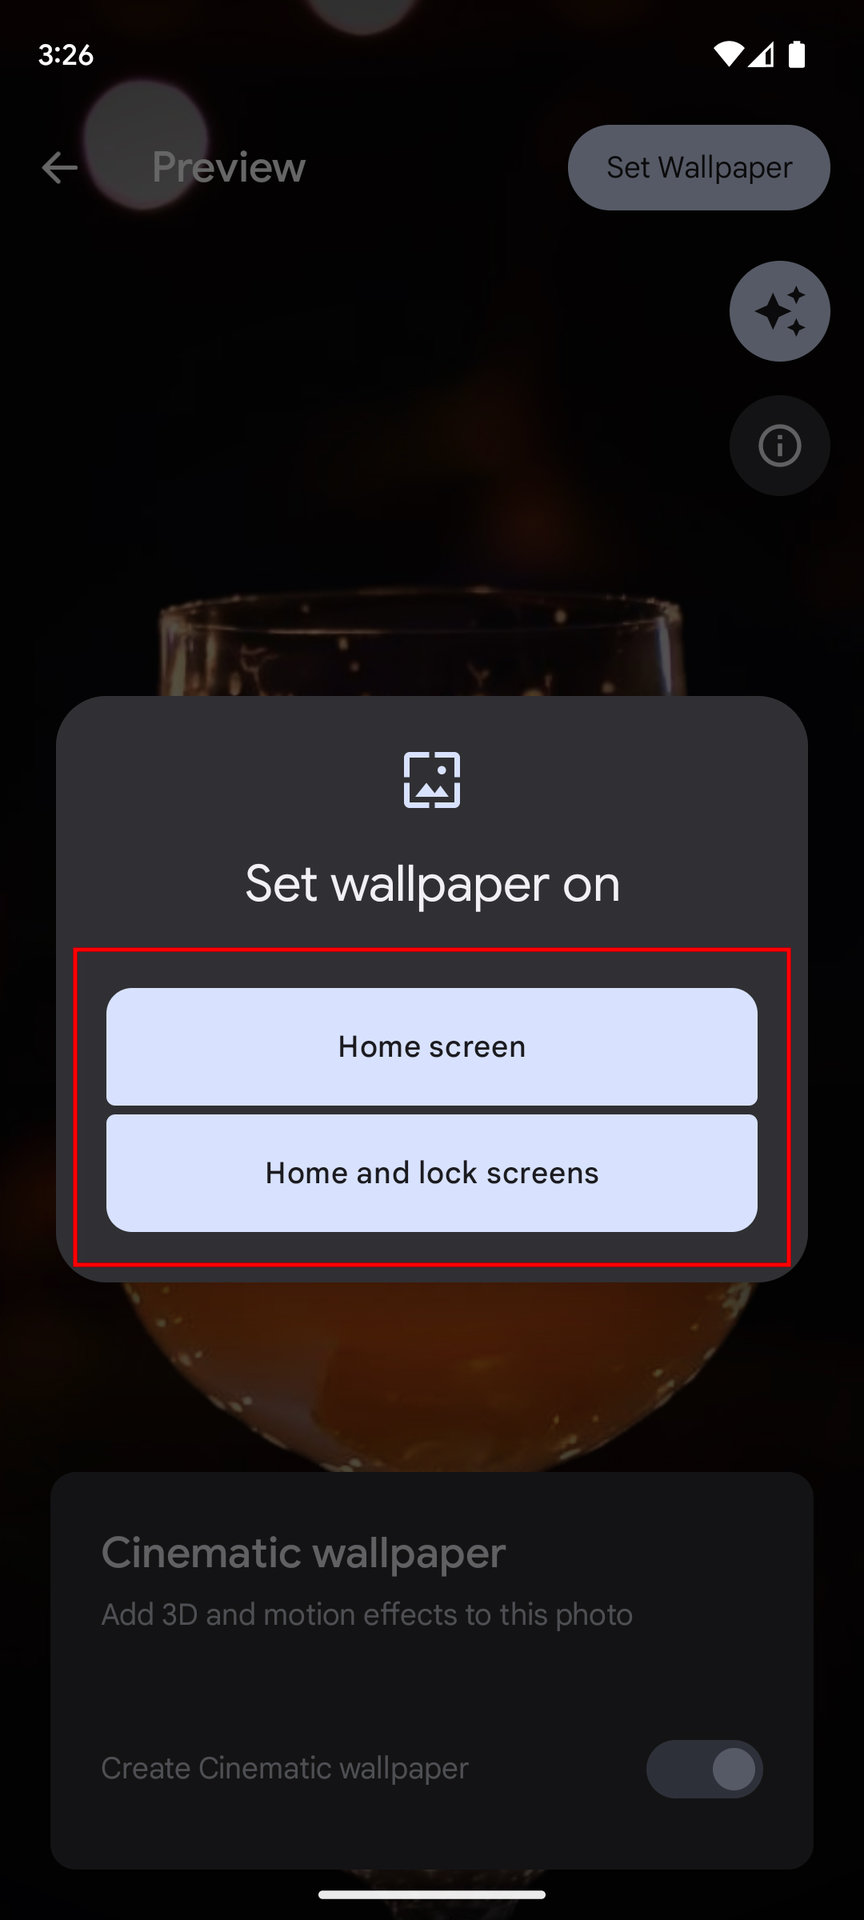 How to create a Cinematic wallpaper on Android 6